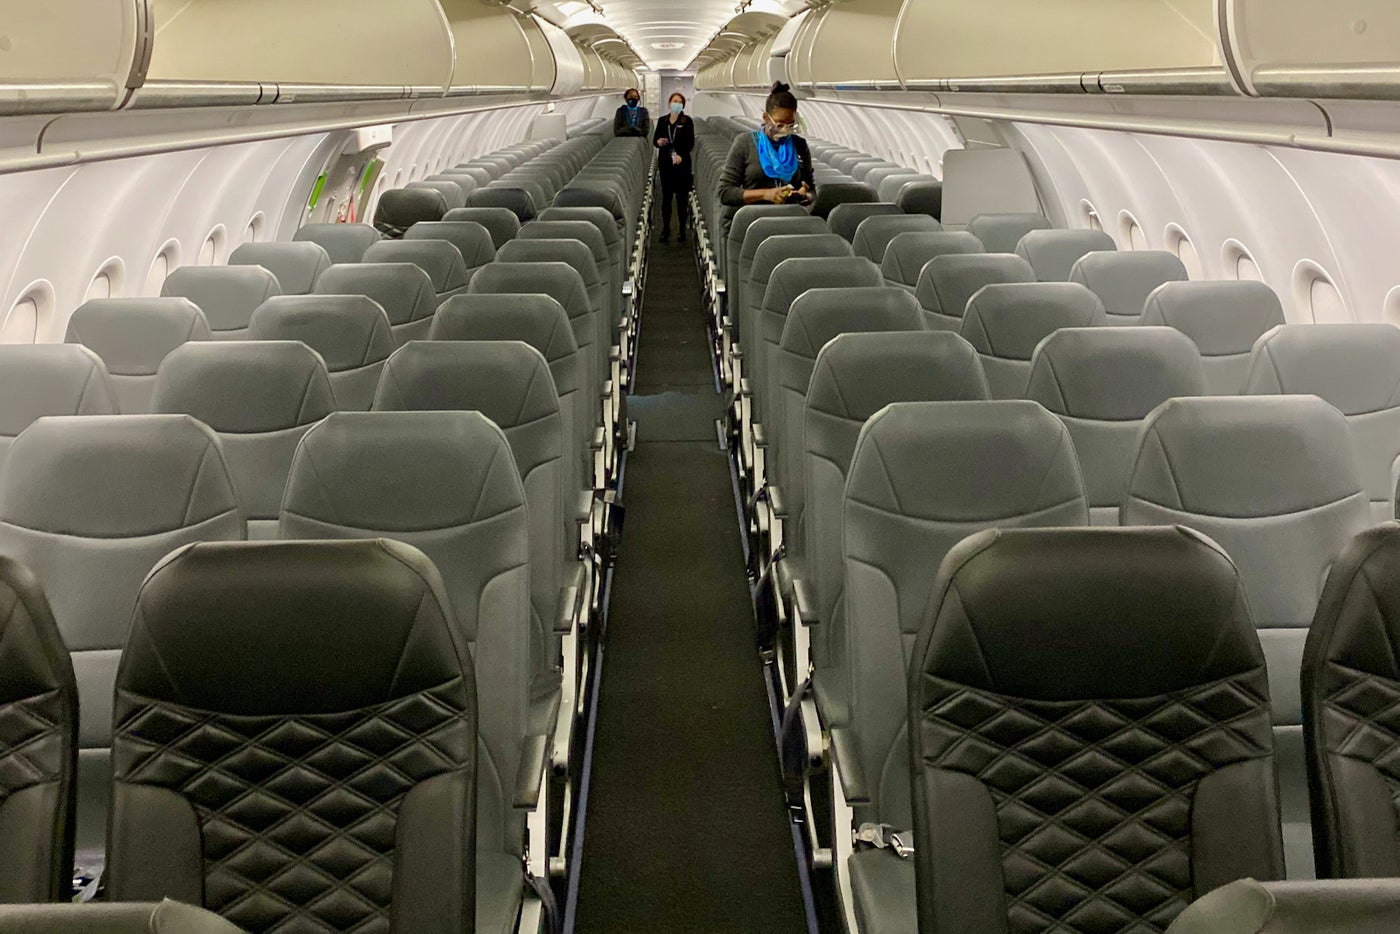 7 takeaways from my first Frontier Airlines flight in over 4 years